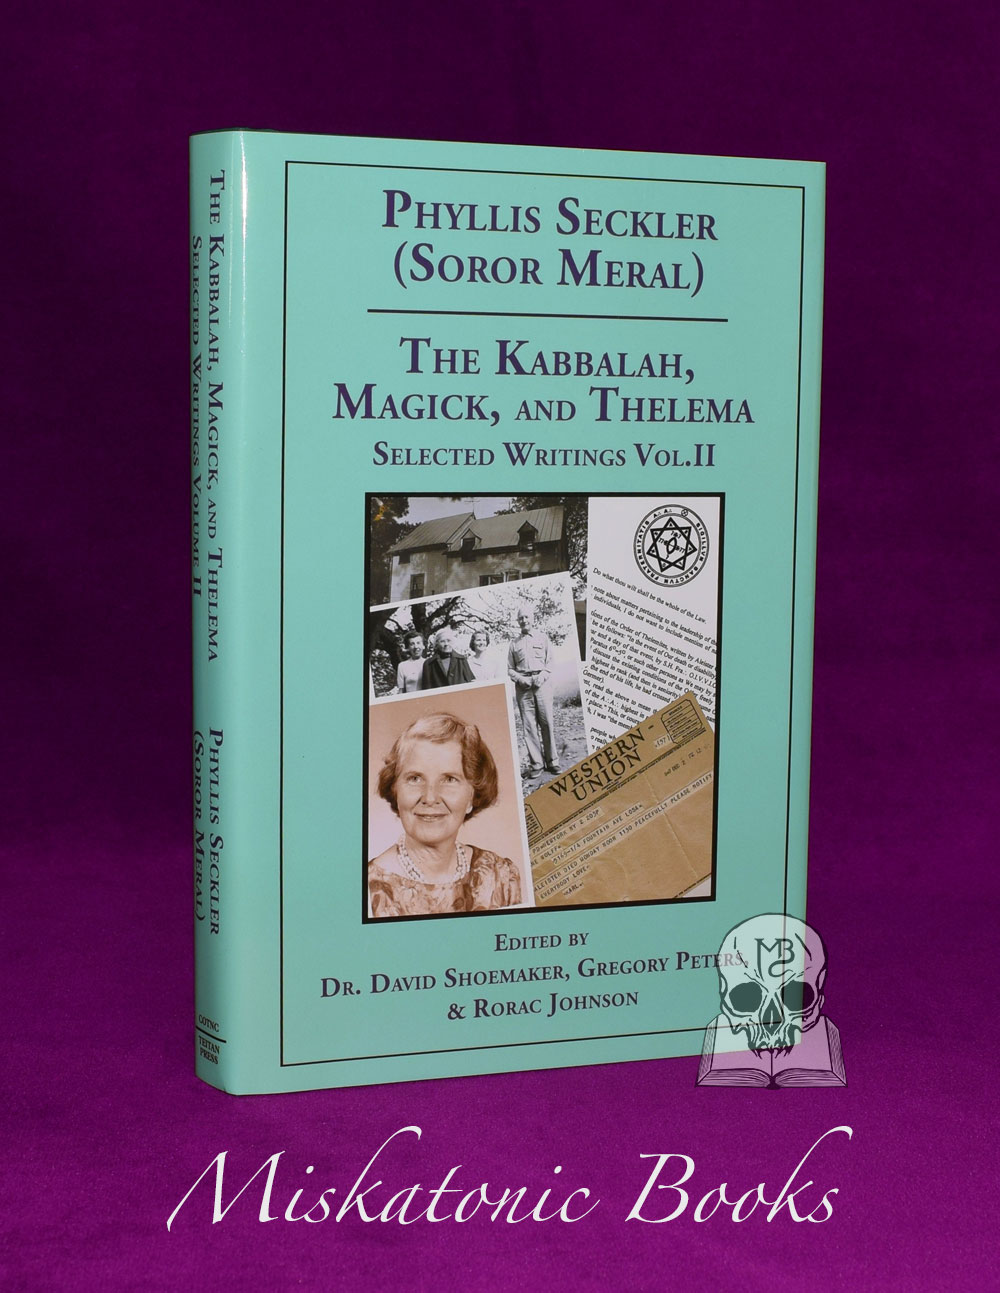 THE KABBALAH, MAGICK, AND THELEMA by Phyllis Seckler - Limited Edition Hardcover